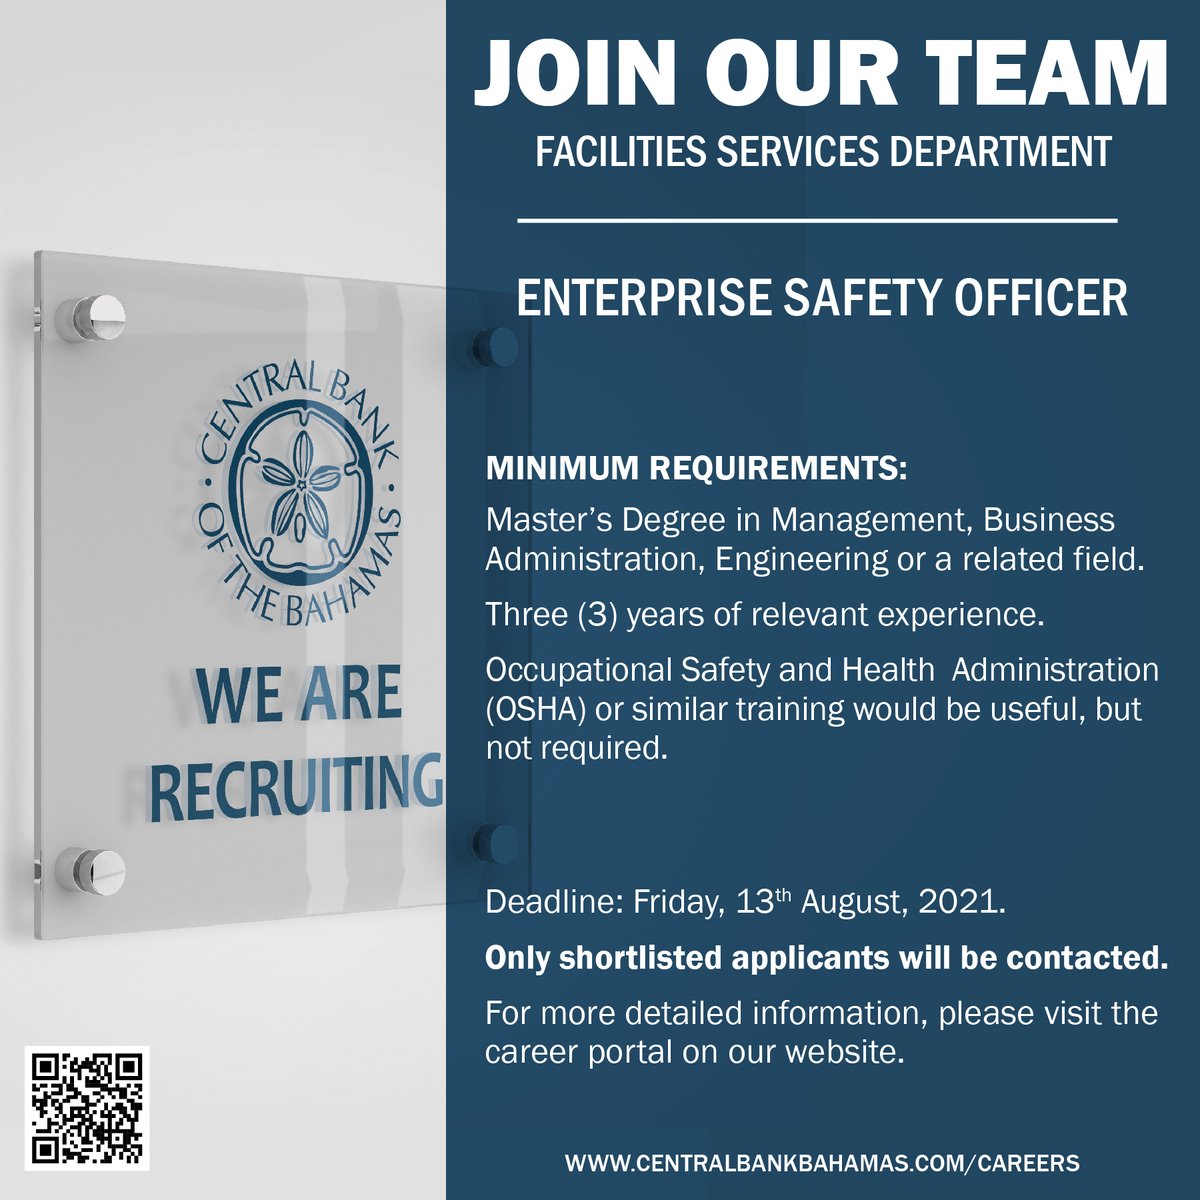 #CareerOpportunity: Enterprise Safety Officer 

Visit bit.ly/33Ke7Qz to #apply

#cbobCareers #centralbankcareers #safetyofficer #enterprisesafety #safety #facilities #facilitiesservices #careers #applyonline